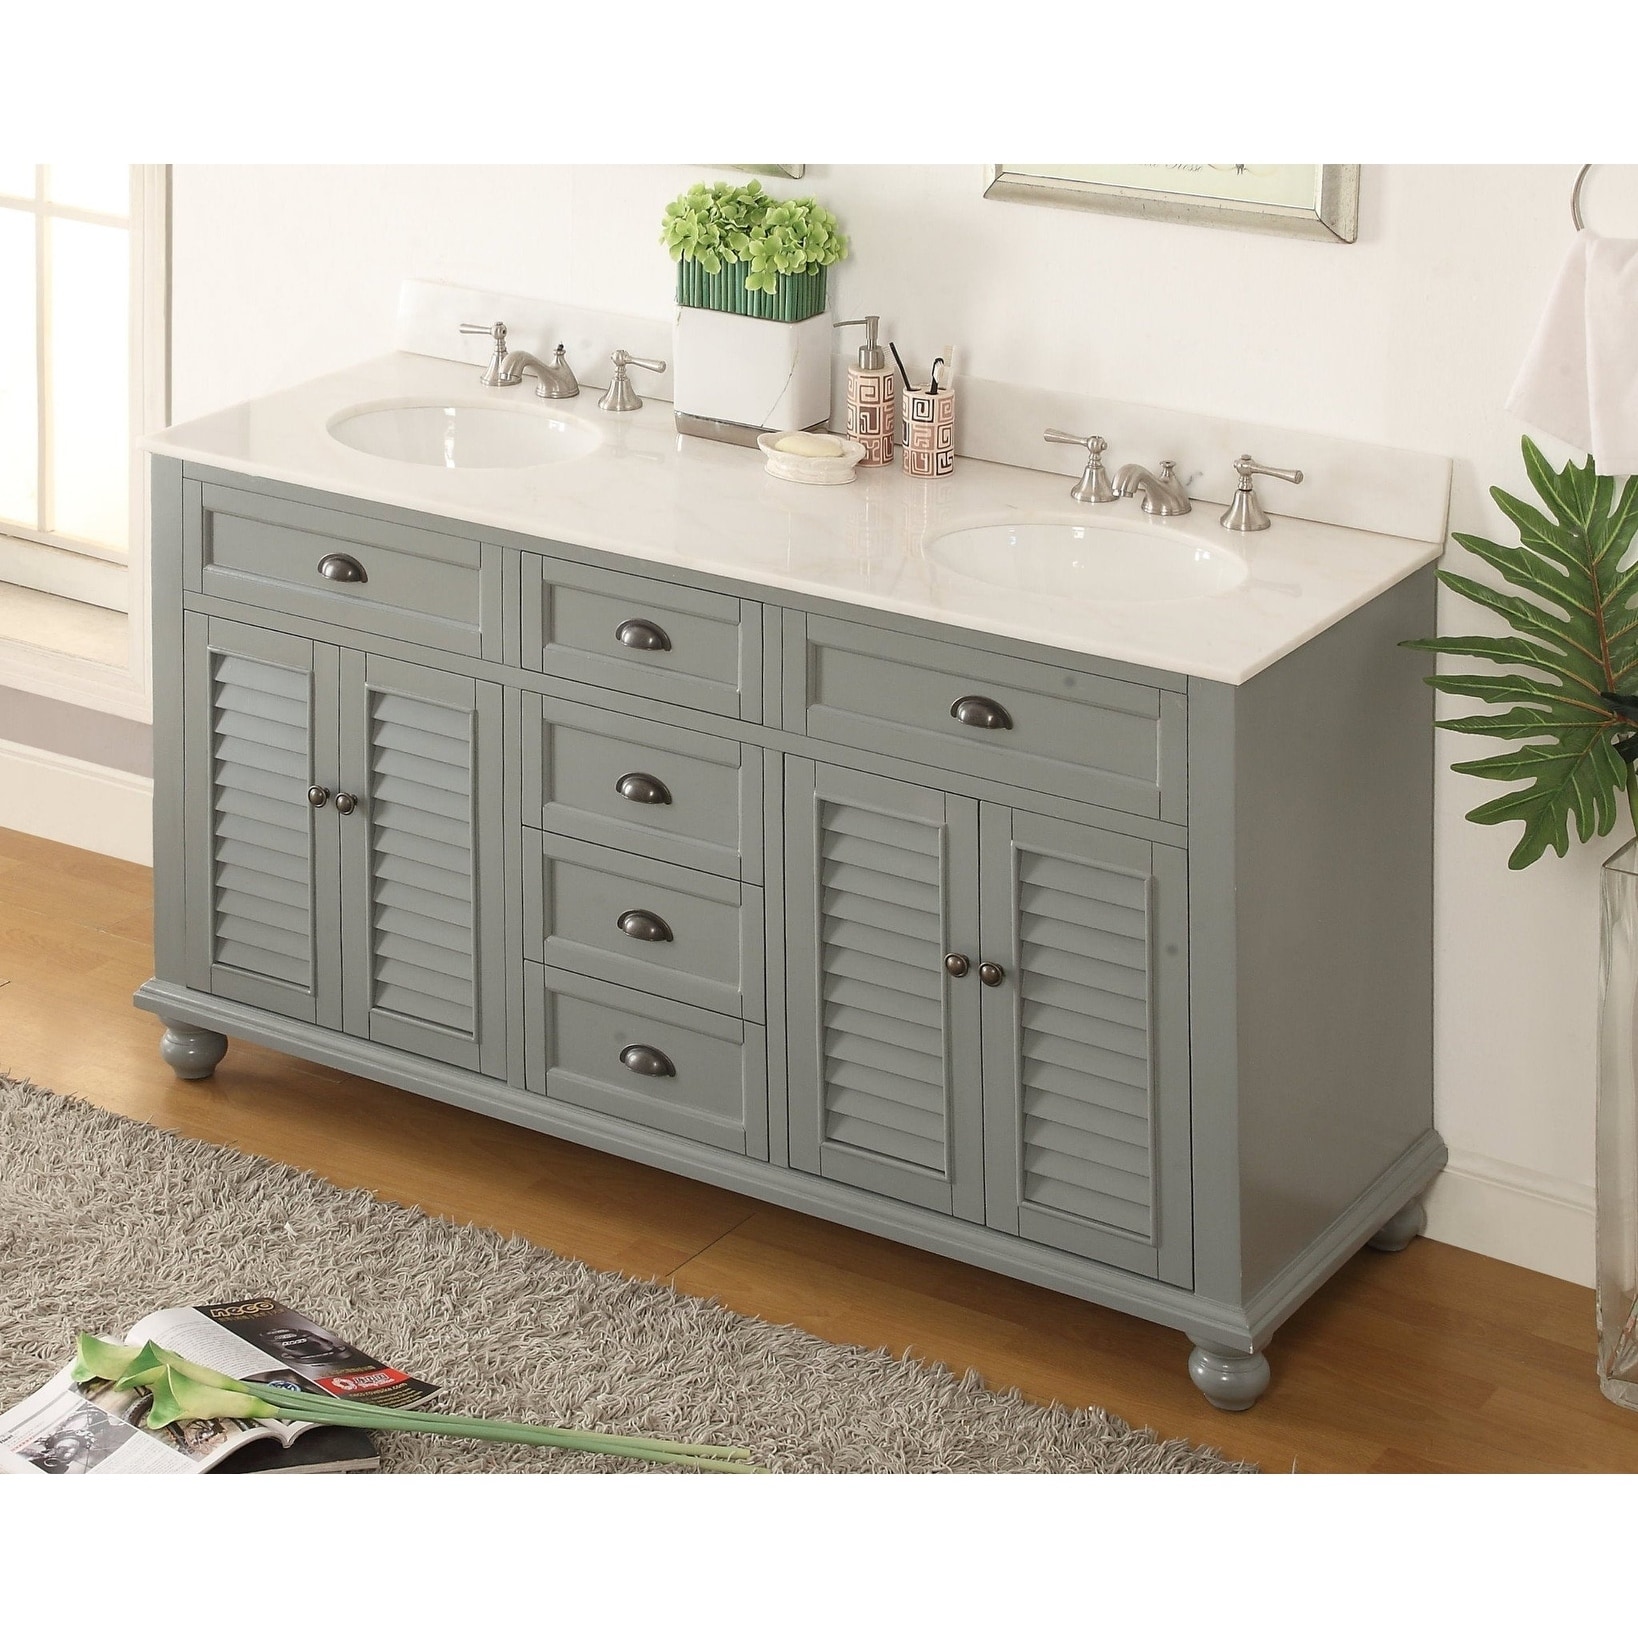 Featured image of post Double Sink Vanity Vintage - At vintage tub &amp; bath, we have a large selection of double bowl vanities including both vintage and modern bathroom vanity sinks.